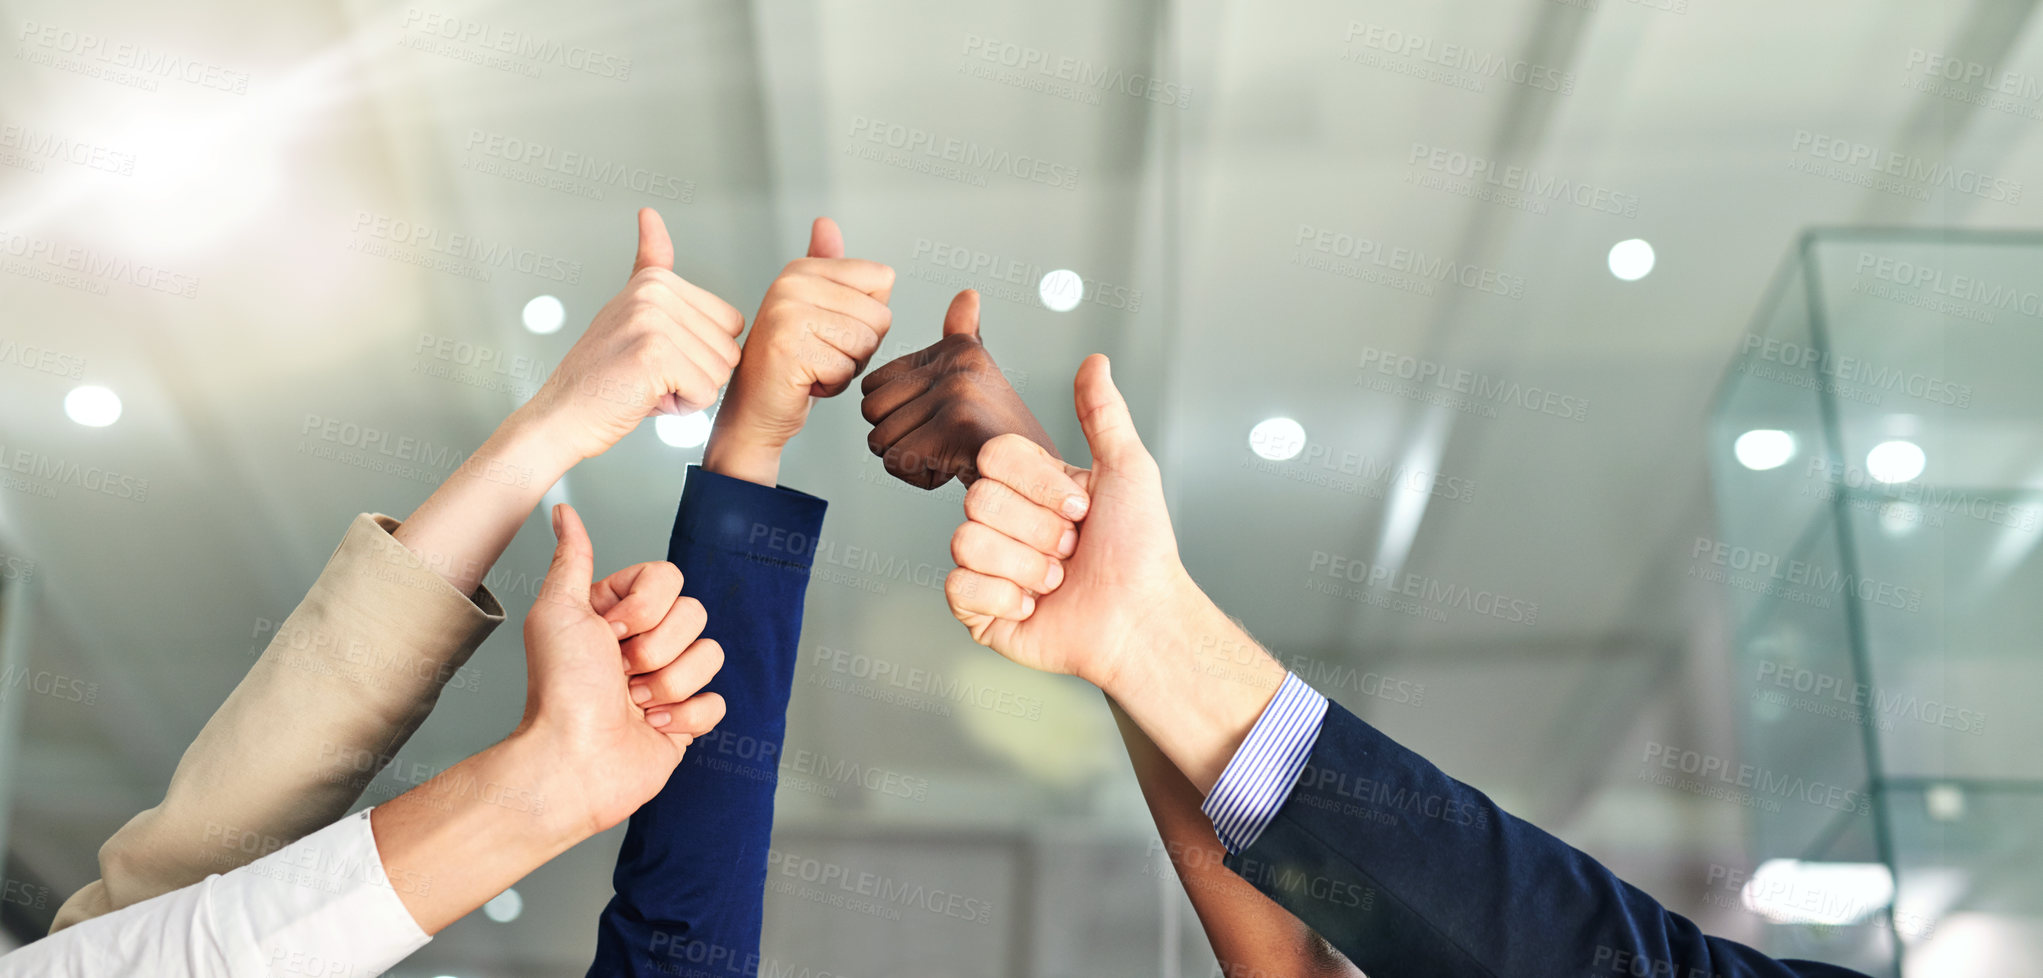 Buy stock photo Shot of a group of hands showing thumbs up in an office